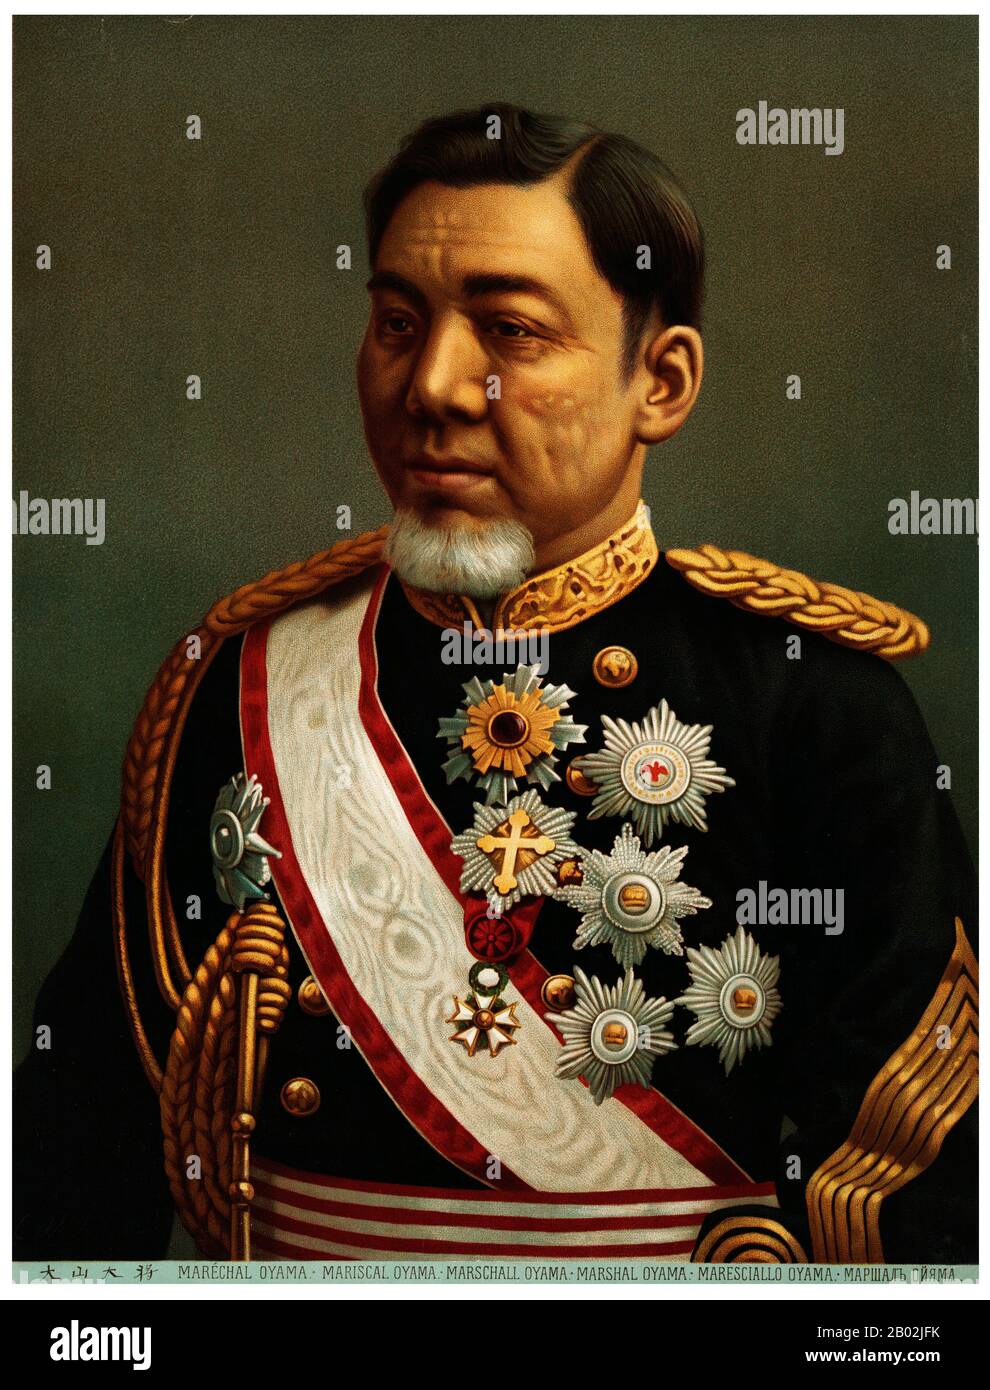 In the First Sino-Japanese War, Ōyama was appointed the commander-in-chief of the Japanese Second Army, which after landing on Liaotung Peninsula, carried Port Arthur by storm, and subsequently crossed to Shantung, where it captured the fortress of Weihaiwei. After the war, Ōyama was disparaged by American reporter Trumbull White for failing to restrain his troops during the Port Arthur Massacre  For his services Ōyama received the title of marquis under the kazoku peerage system, and, three years later, he became a field-marshal. In the Russo-Japanese War of 1904-1905 he was appointed the Com Stock Photo